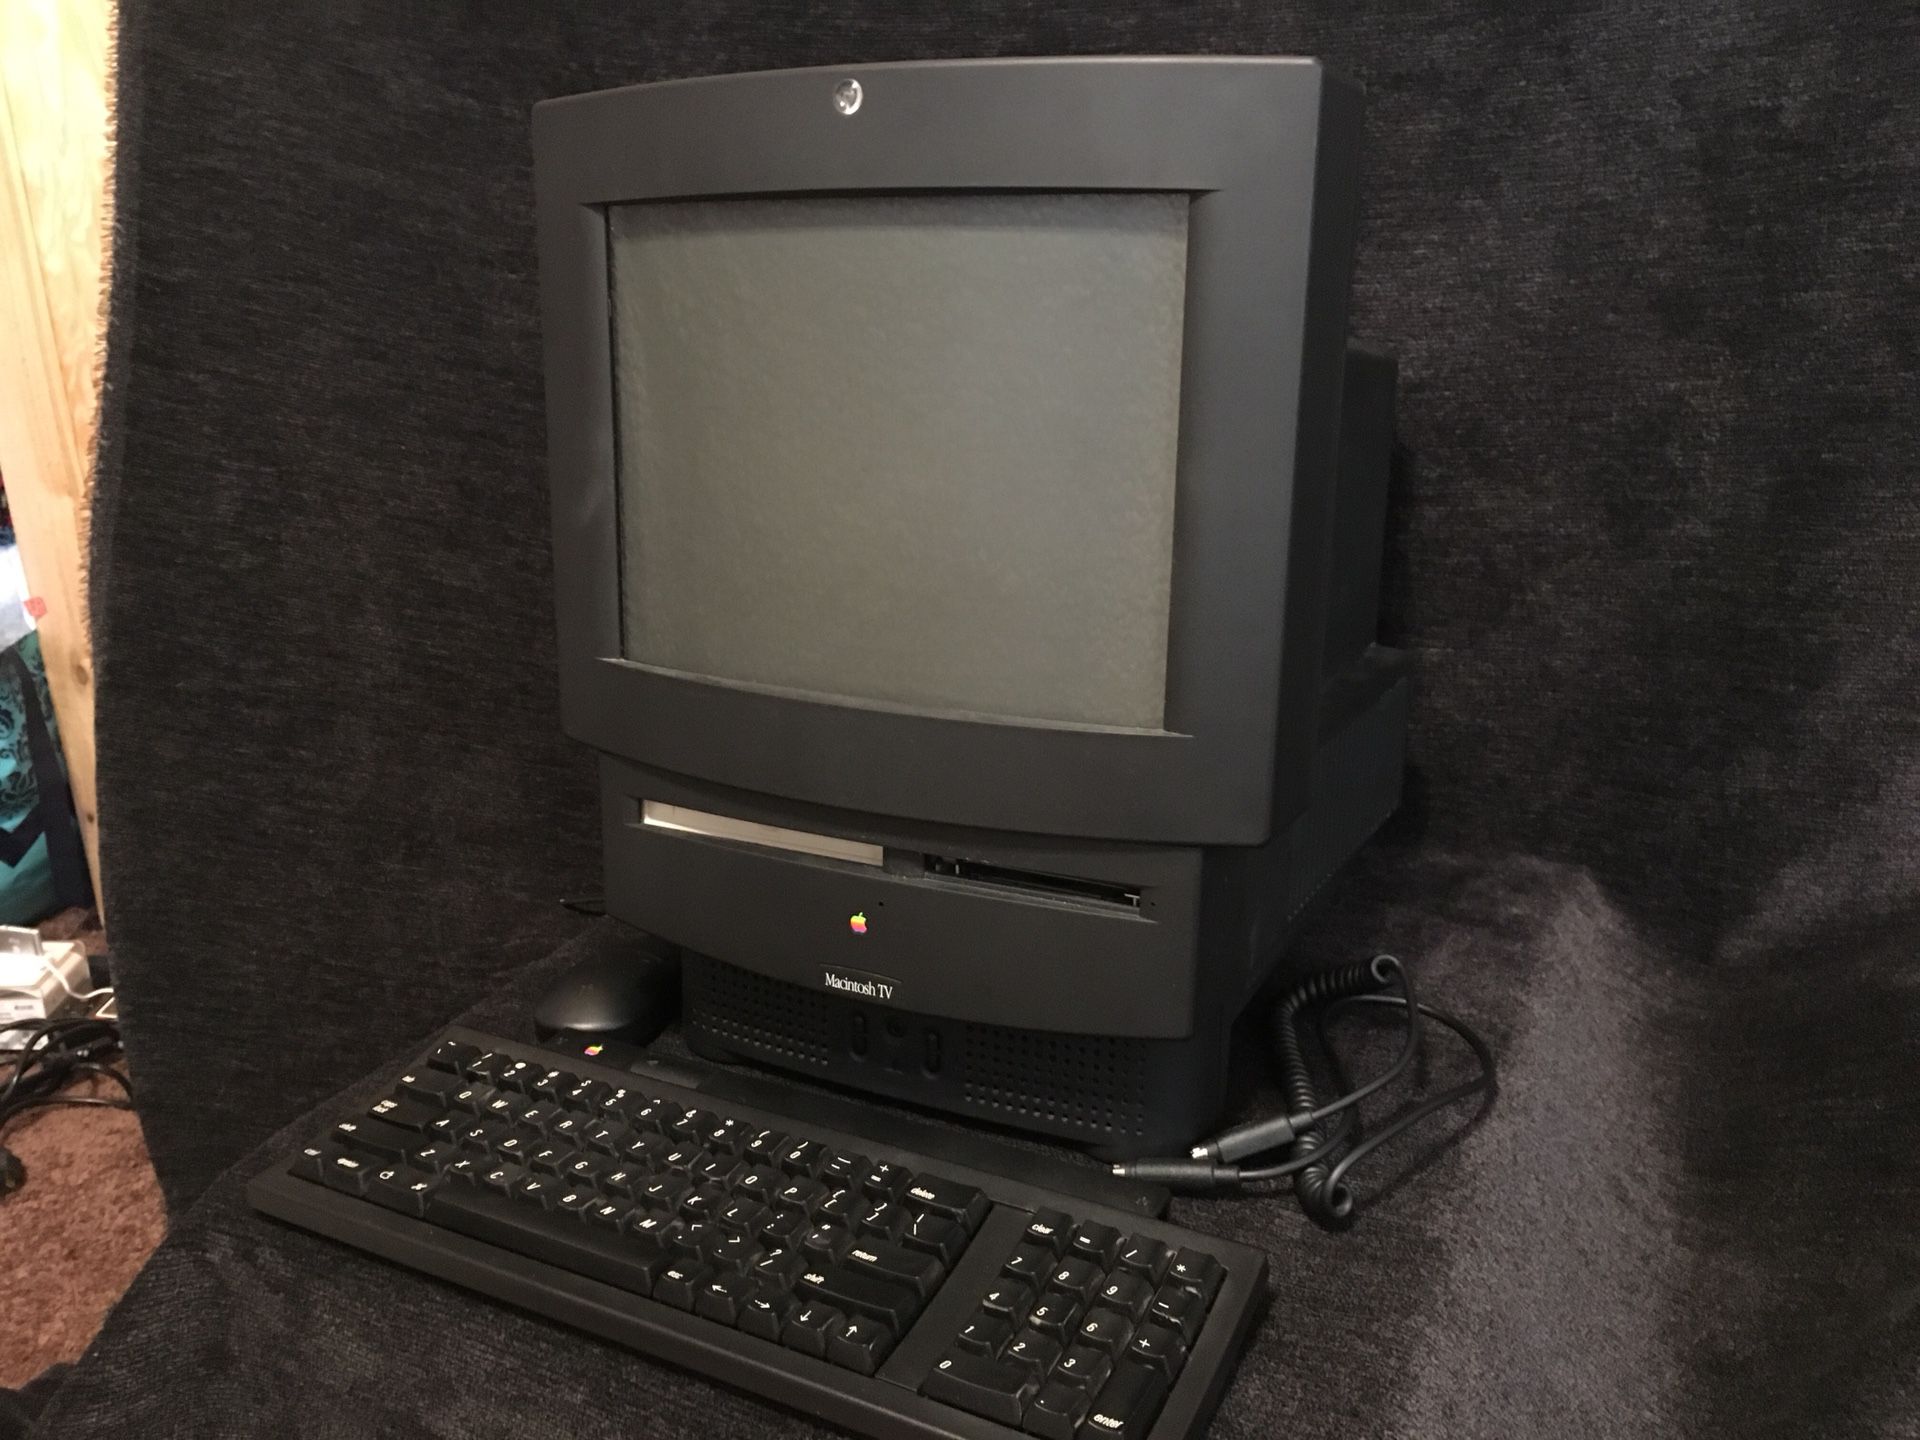 Macintosh Apple TV Vintage Black Computer M1580 with original keyboard and mouse